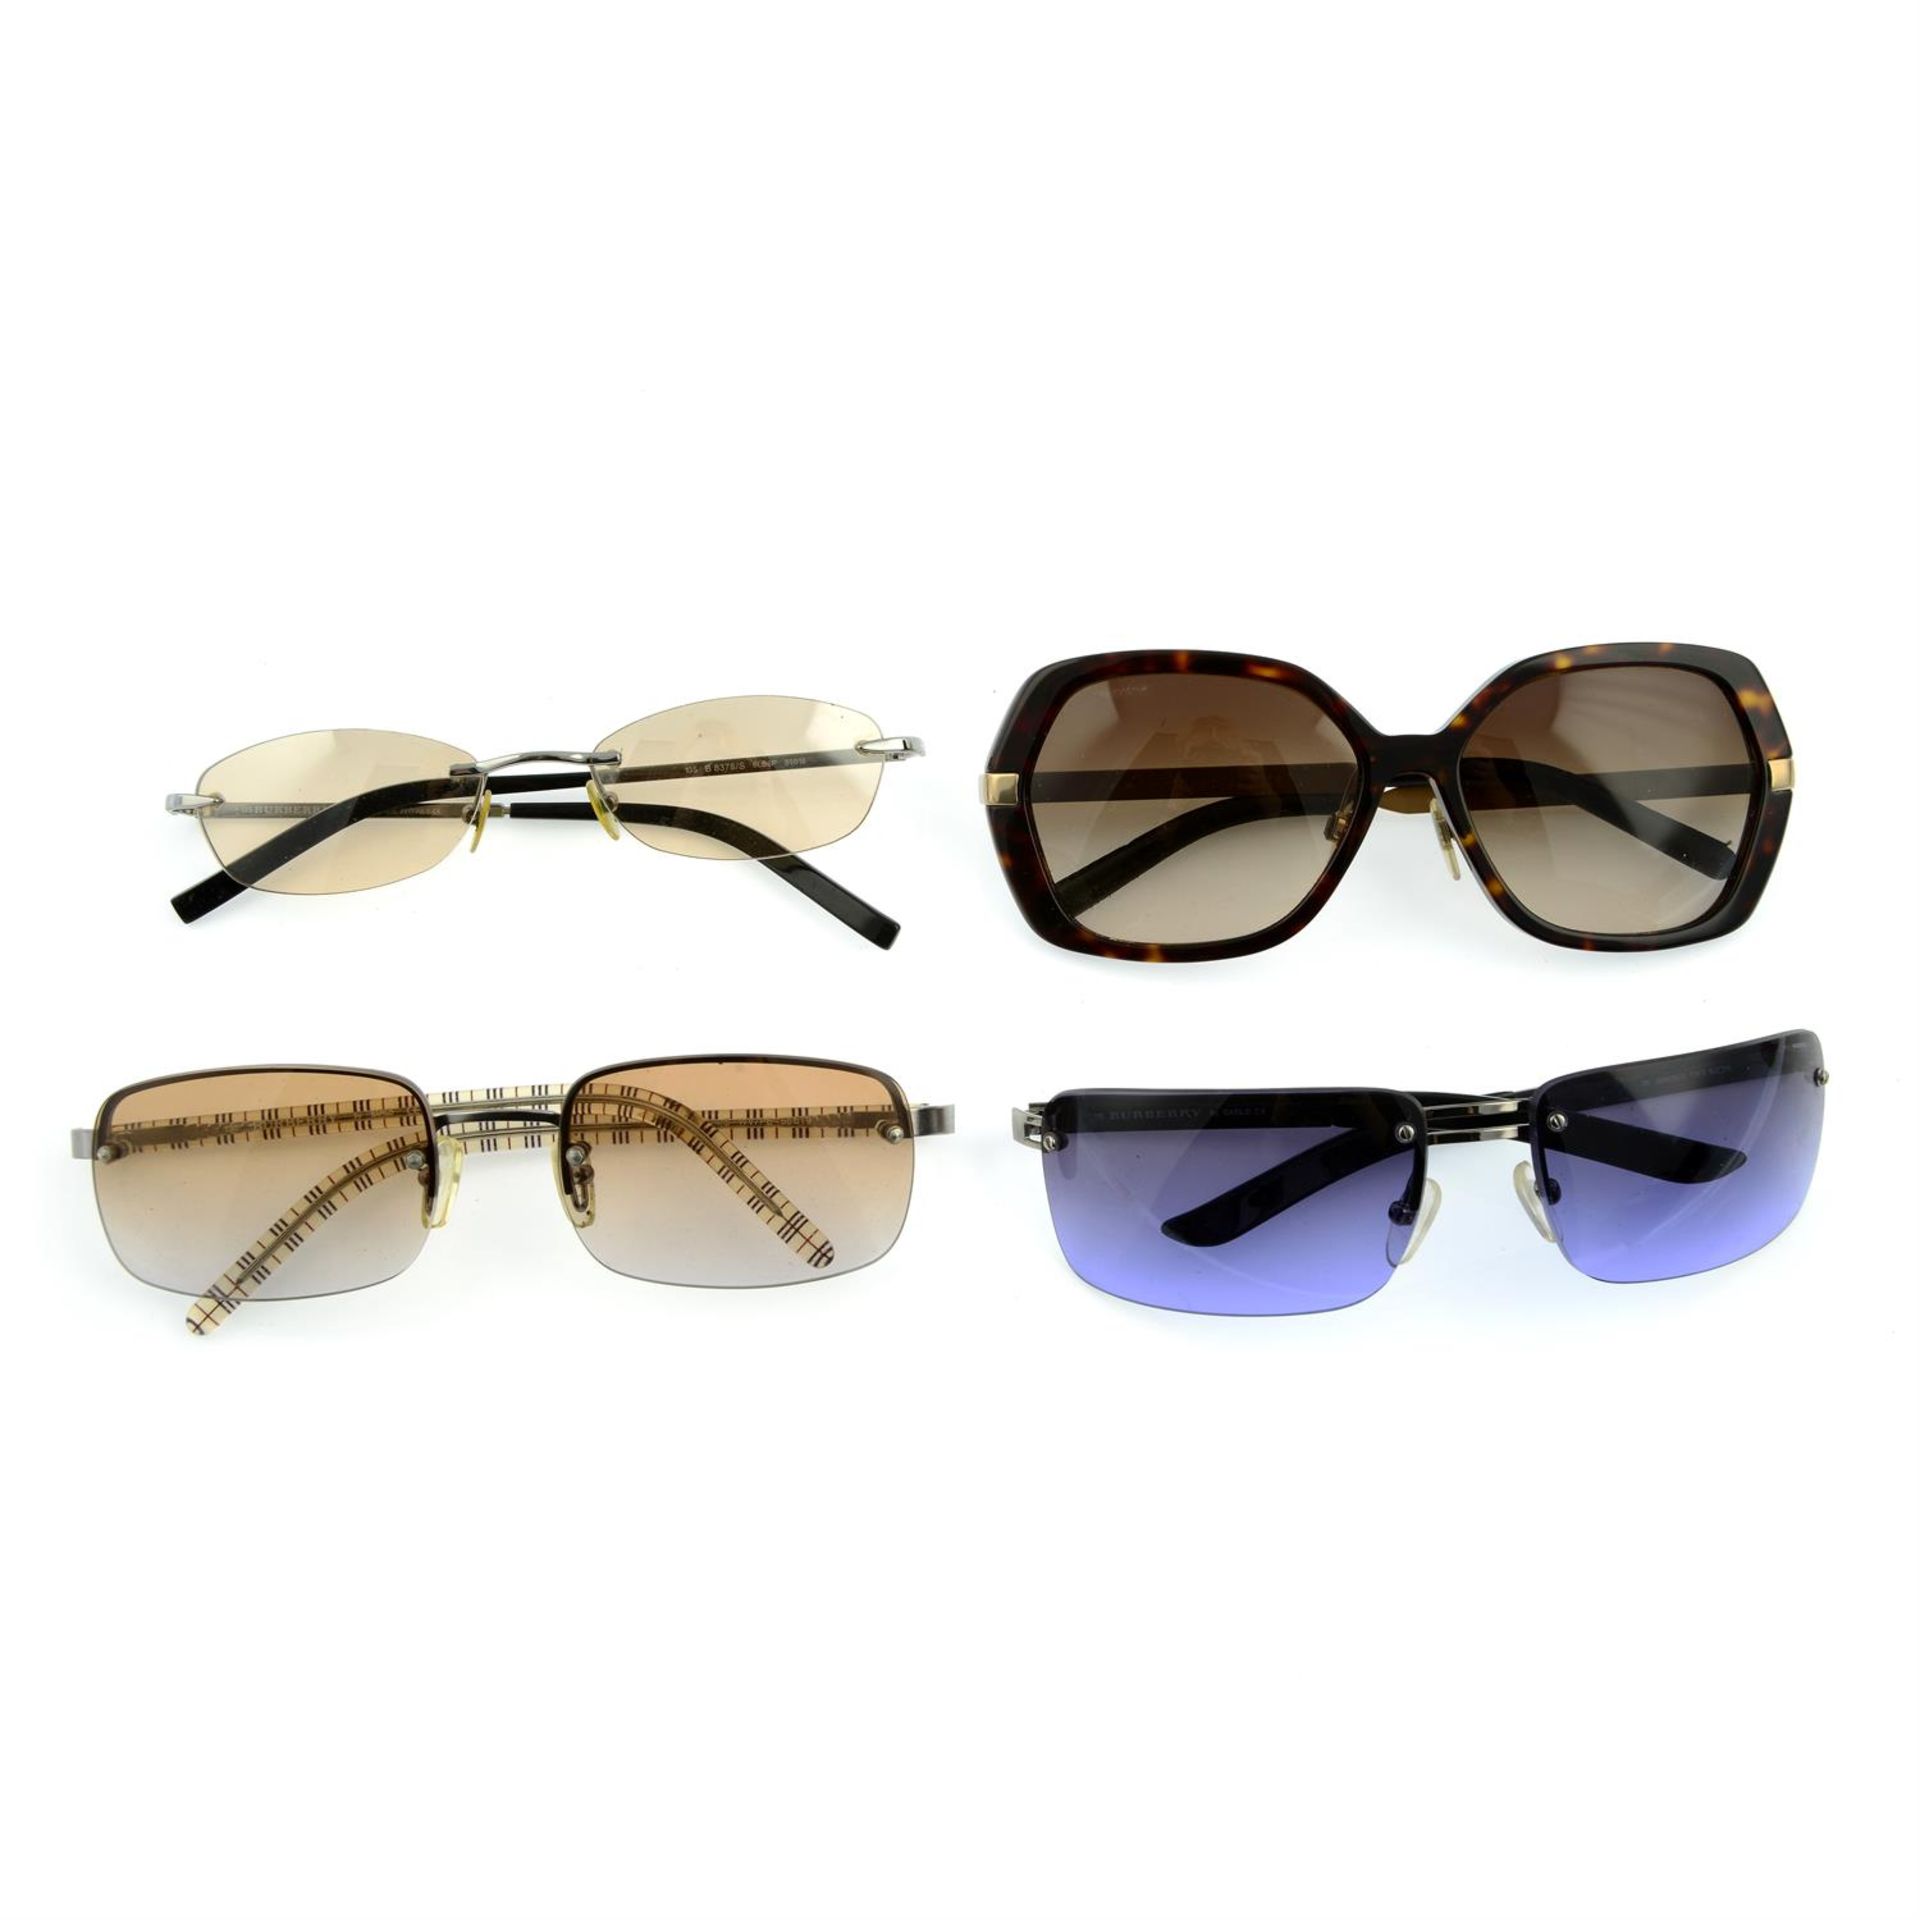 BURBERRY - four pairs of sunglasses.